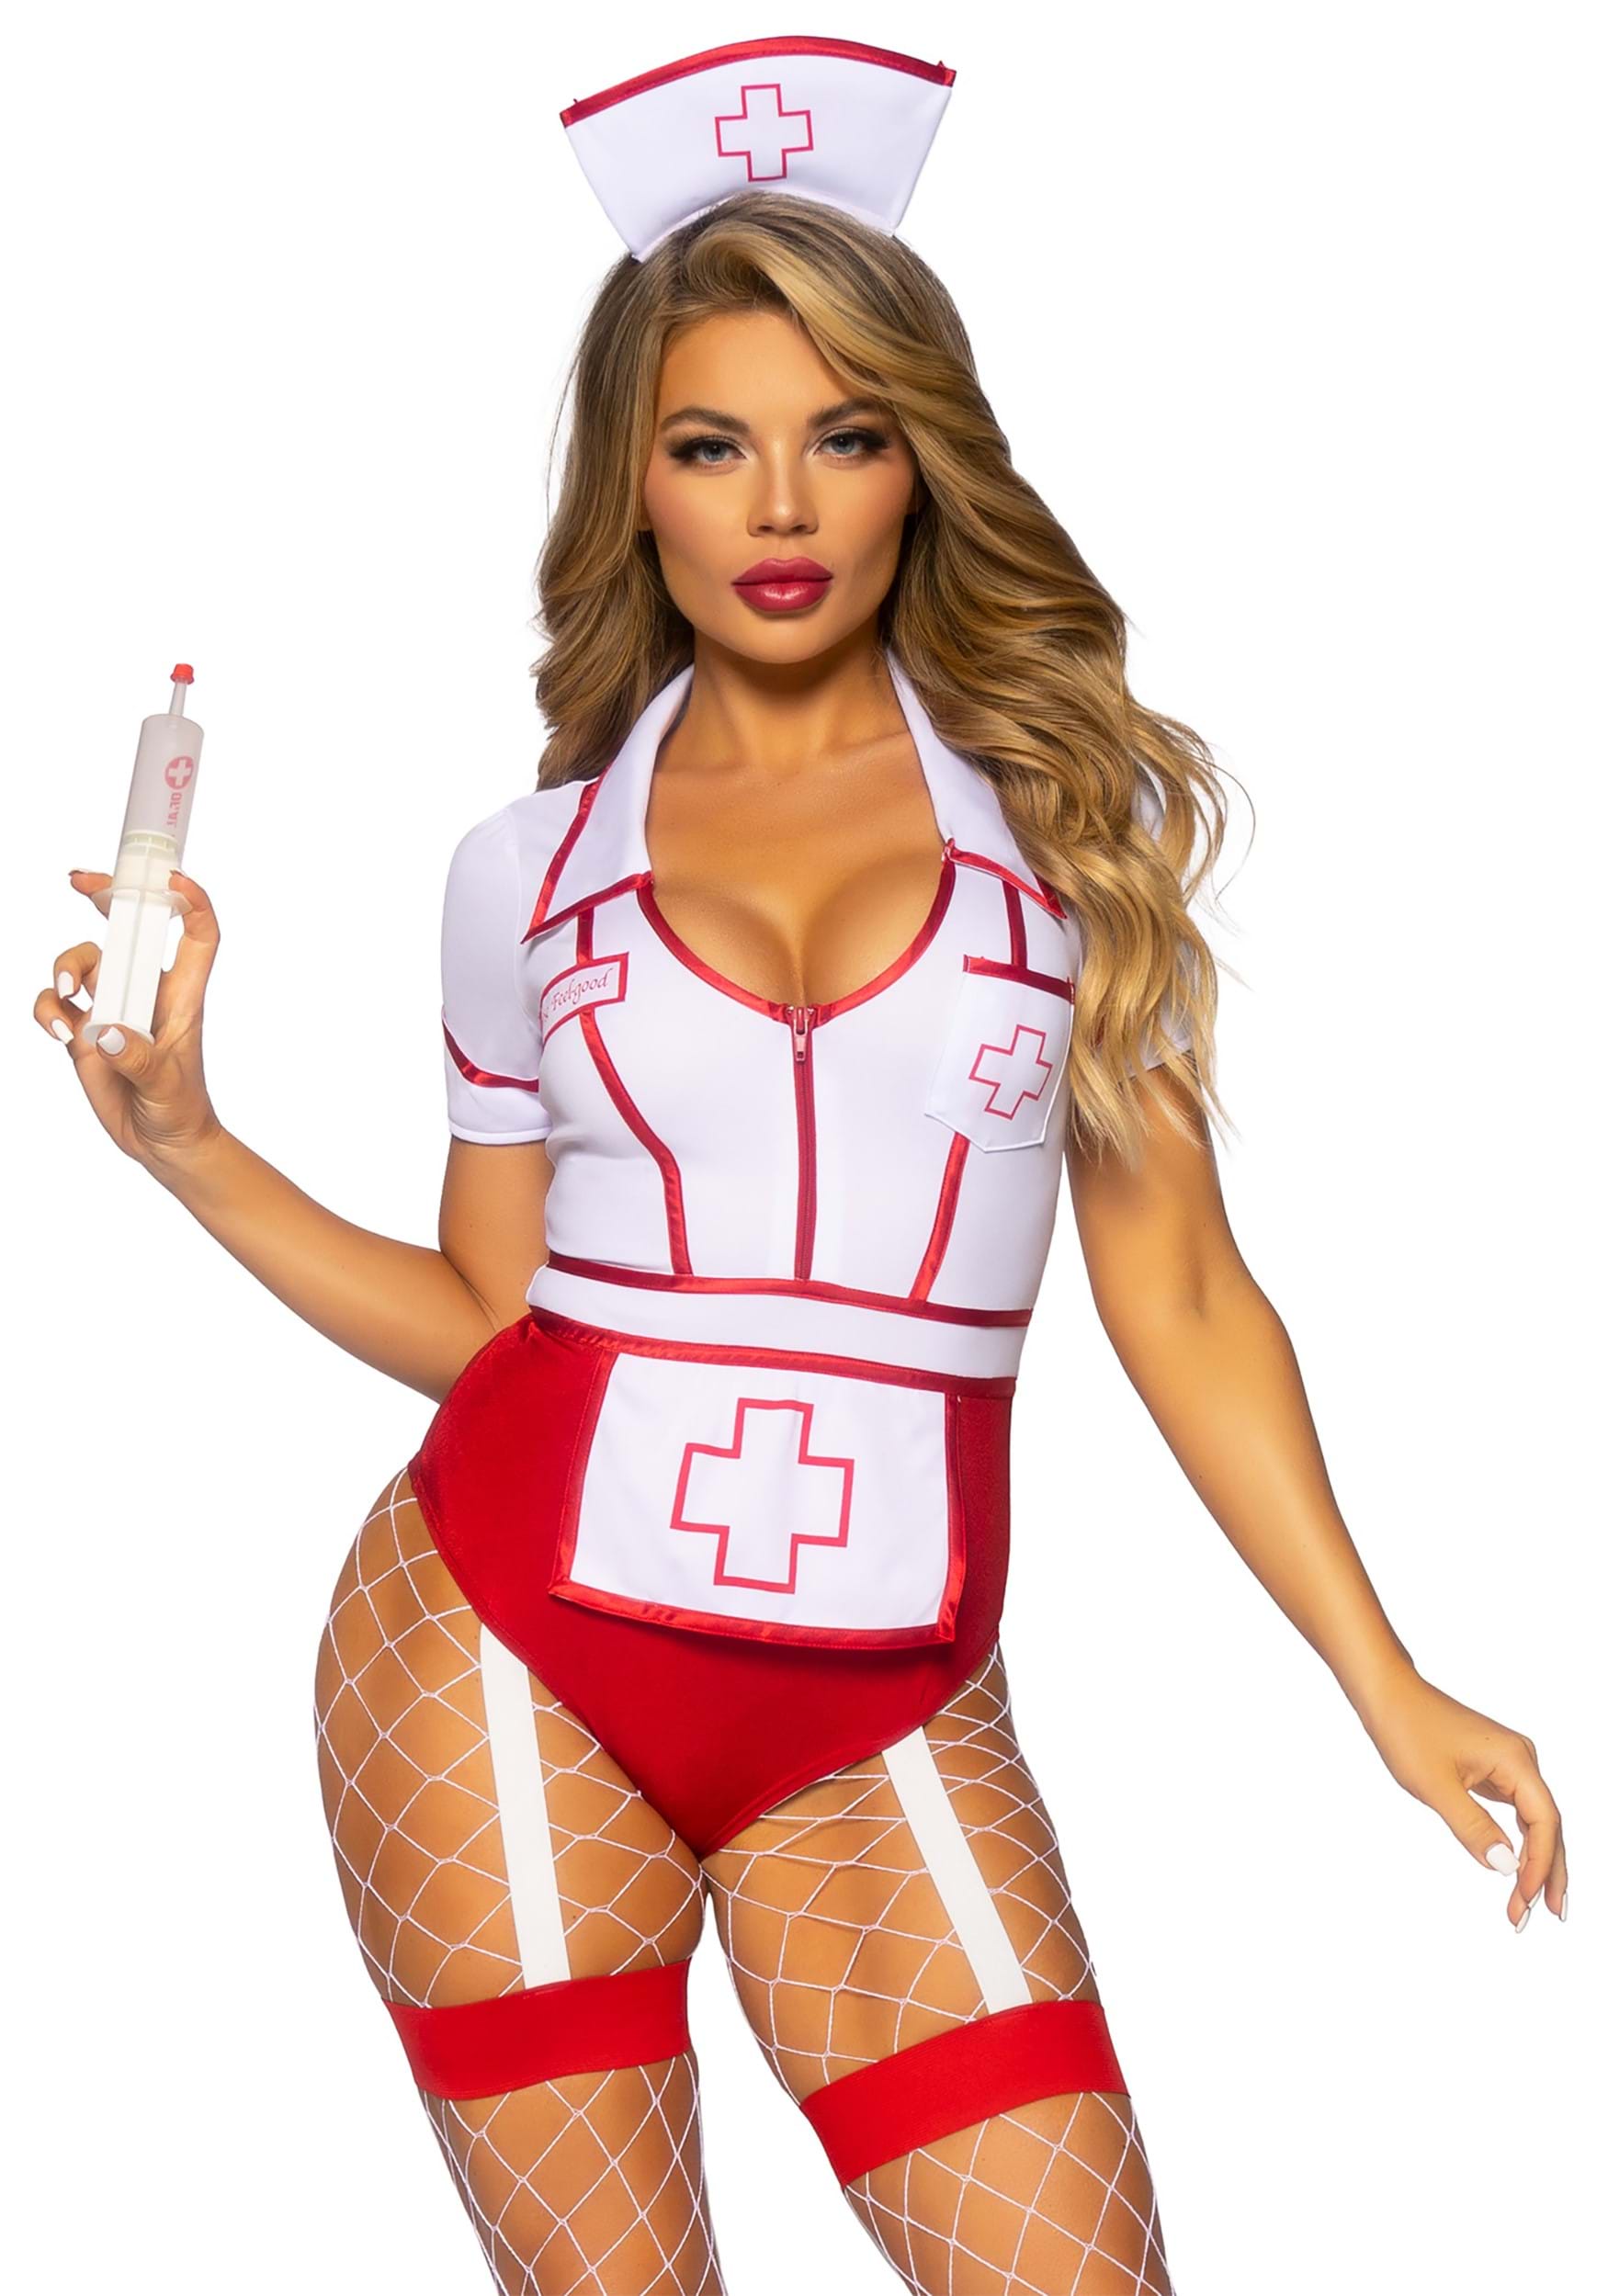 https://images.halloweencostumes.ca/products/82822/1-1/womens-feelgood-sexy-nurse-costume.jpg